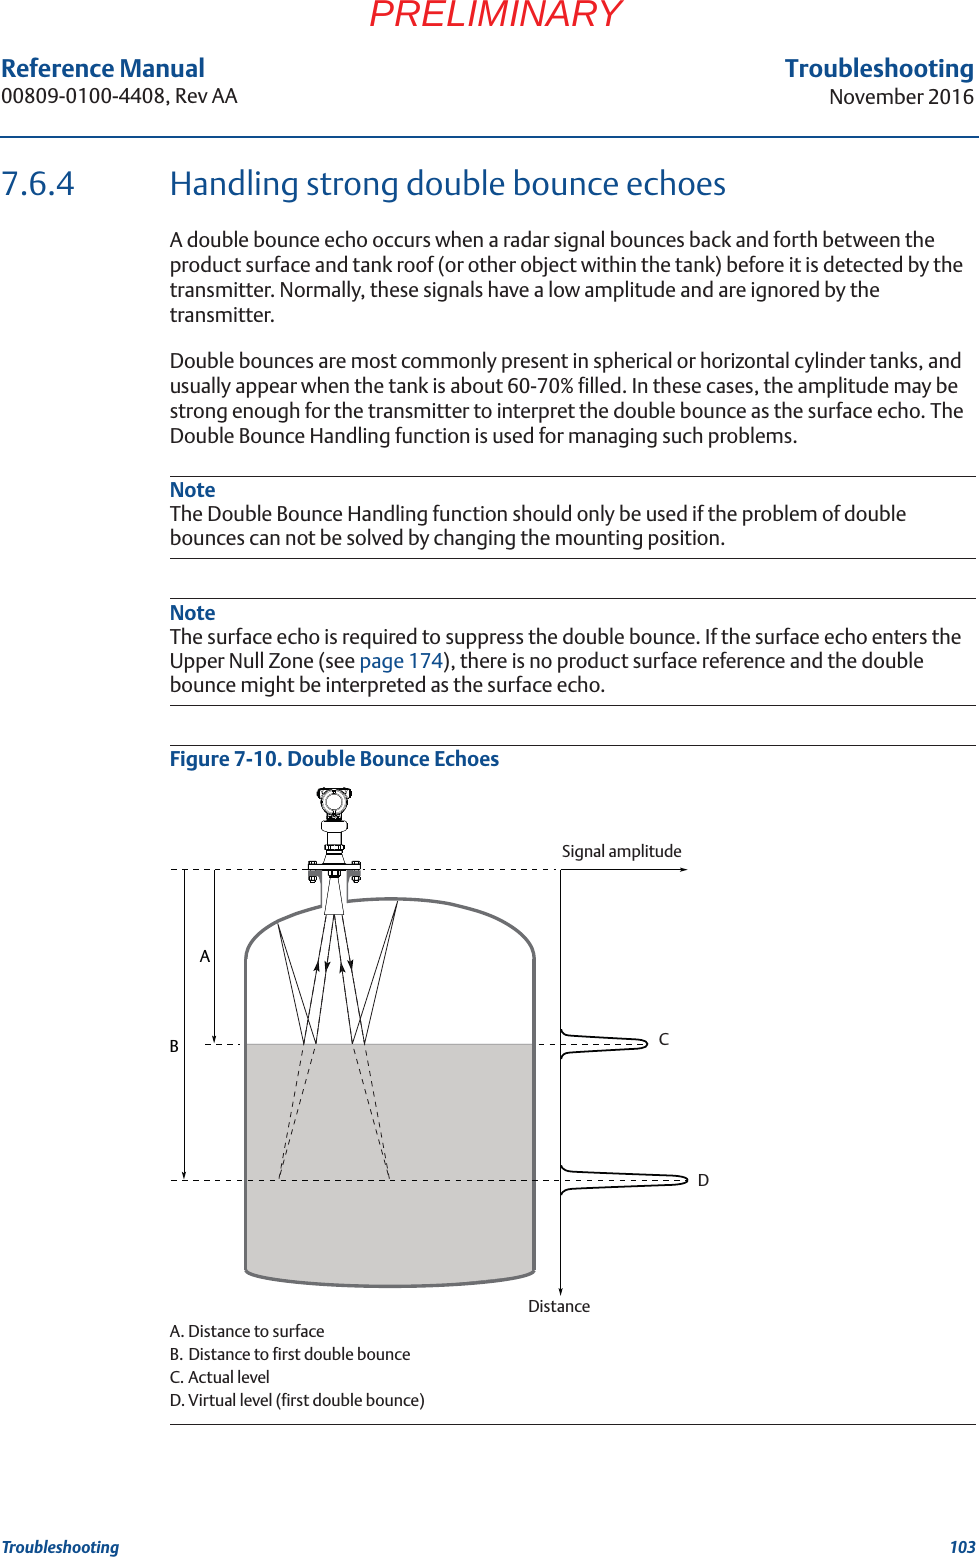 103Reference Manual 00809-0100-4408, Rev AATroubleshootingNovember 2016TroubleshootingPRELIMINARY7.6.4 Handling strong double bounce echoesA double bounce echo occurs when a radar signal bounces back and forth between the product surface and tank roof (or other object within the tank) before it is detected by the transmitter. Normally, these signals have a low amplitude and are ignored by the transmitter.Double bounces are most commonly present in spherical or horizontal cylinder tanks, and usually appear when the tank is about 60-70% filled. In these cases, the amplitude may be strong enough for the transmitter to interpret the double bounce as the surface echo. The Double Bounce Handling function is used for managing such problems.NoteThe Double Bounce Handling function should only be used if the problem of double bounces can not be solved by changing the mounting position.NoteThe surface echo is required to suppress the double bounce. If the surface echo enters the Upper Null Zone (see page 174), there is no product surface reference and the double bounce might be interpreted as the surface echo.Figure 7-10. Double Bounce EchoesA. Distance to surfaceB. Distance to first double bounceC. Actual levelD. Virtual level (first double bounce)ABDistanceSignal amplitudeCD